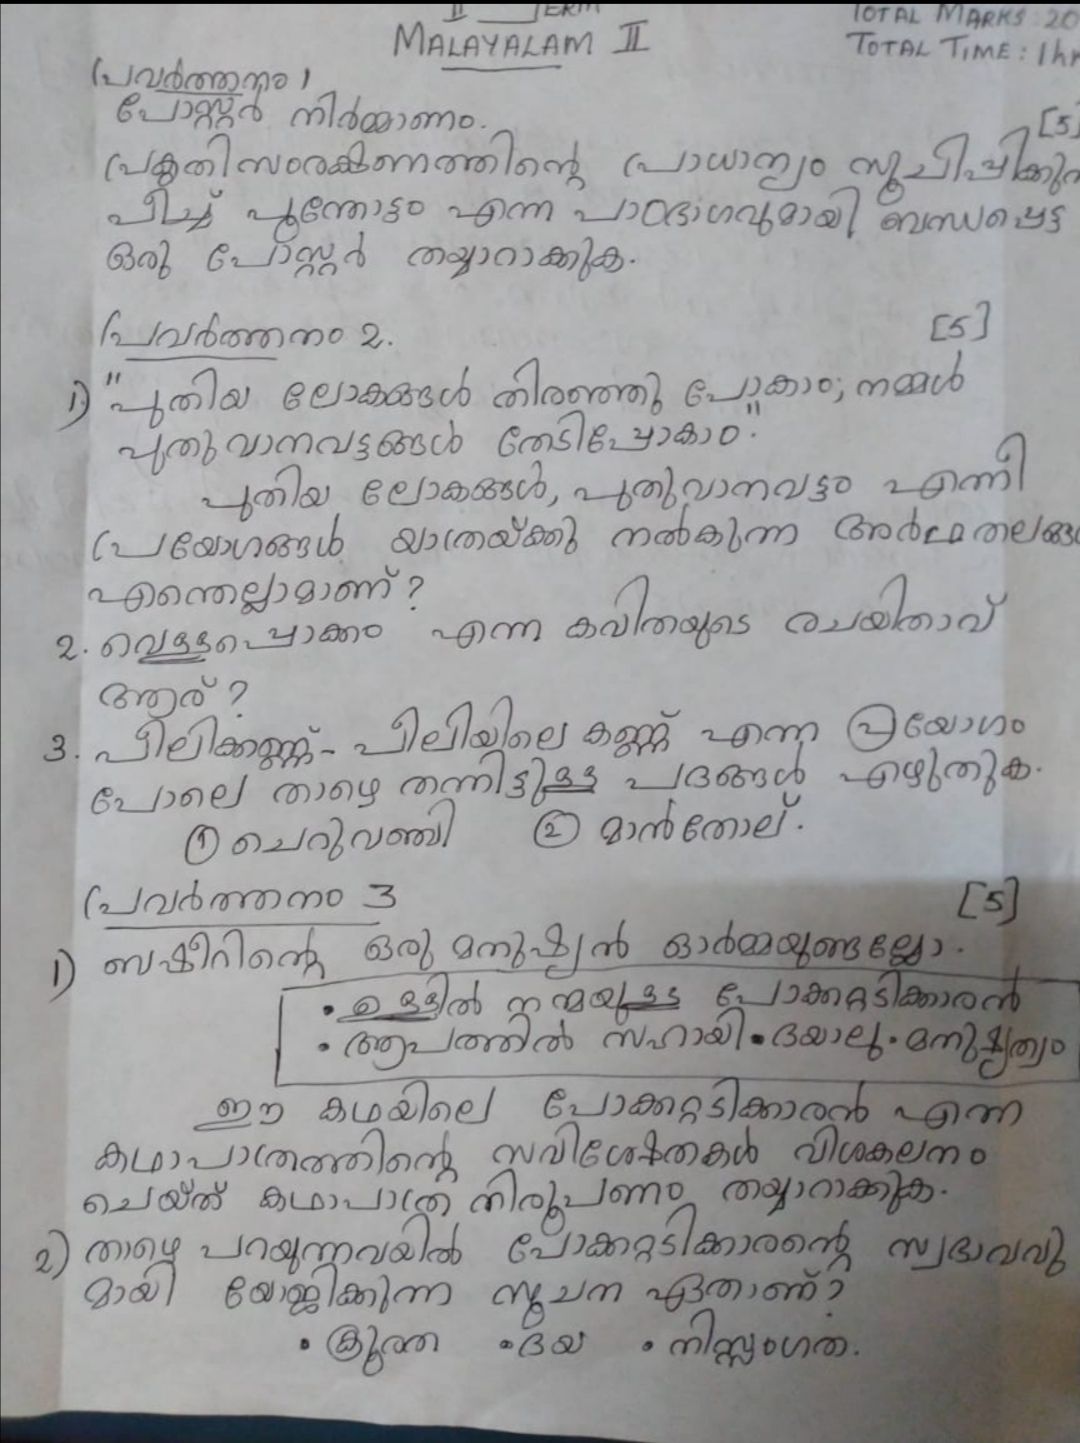 malayalam term of assignment